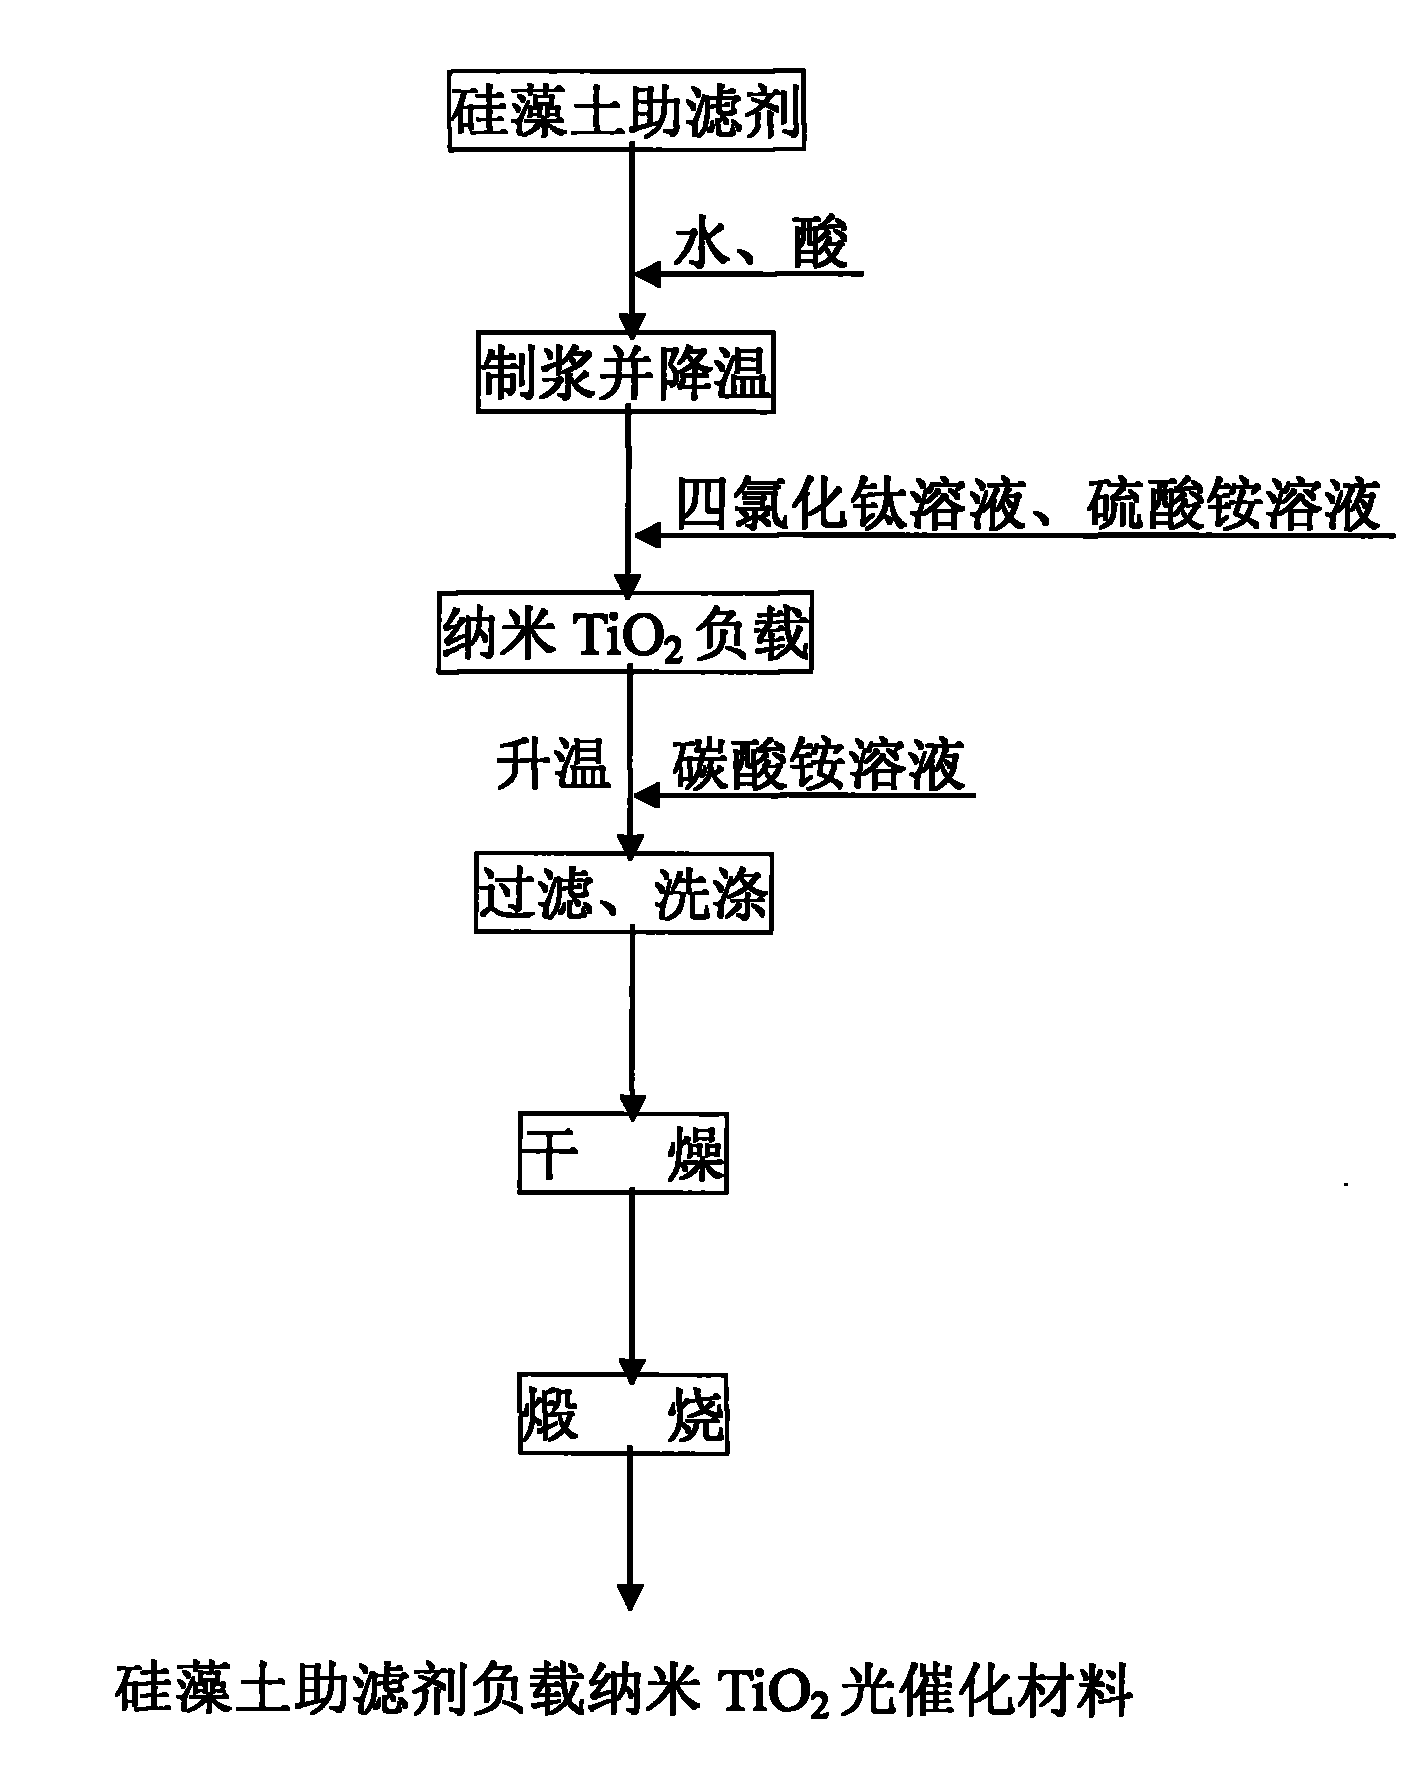 Preparation method of supported nano TiO2 photocatalytic material with diatomite filter aid as carrier